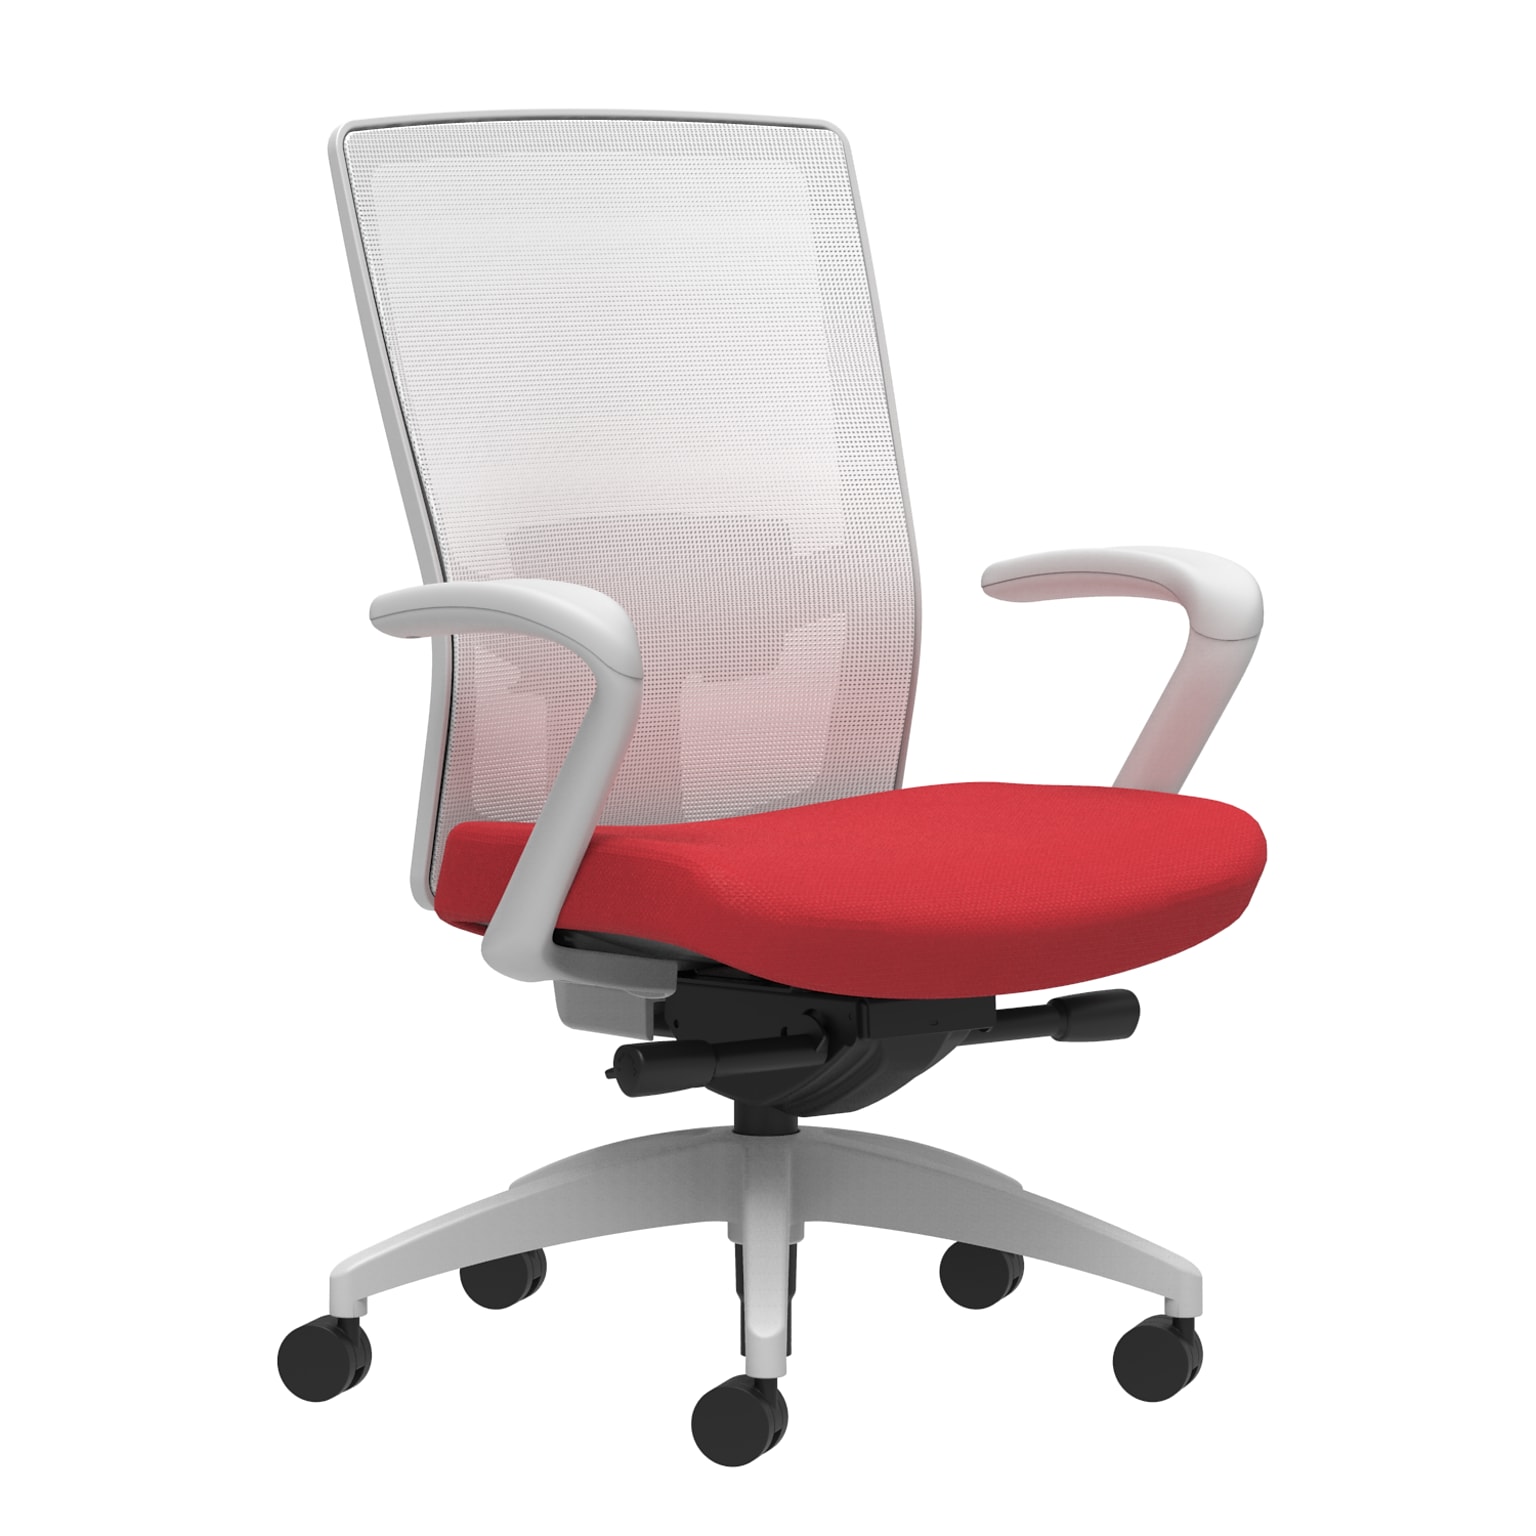 Union & Scale Workplace2.0™ Fabric Task Chair, Cherry, Adjustable Lumbar, Fixed Arms, Advanced Synchro-Tilt Seat Control (53581)